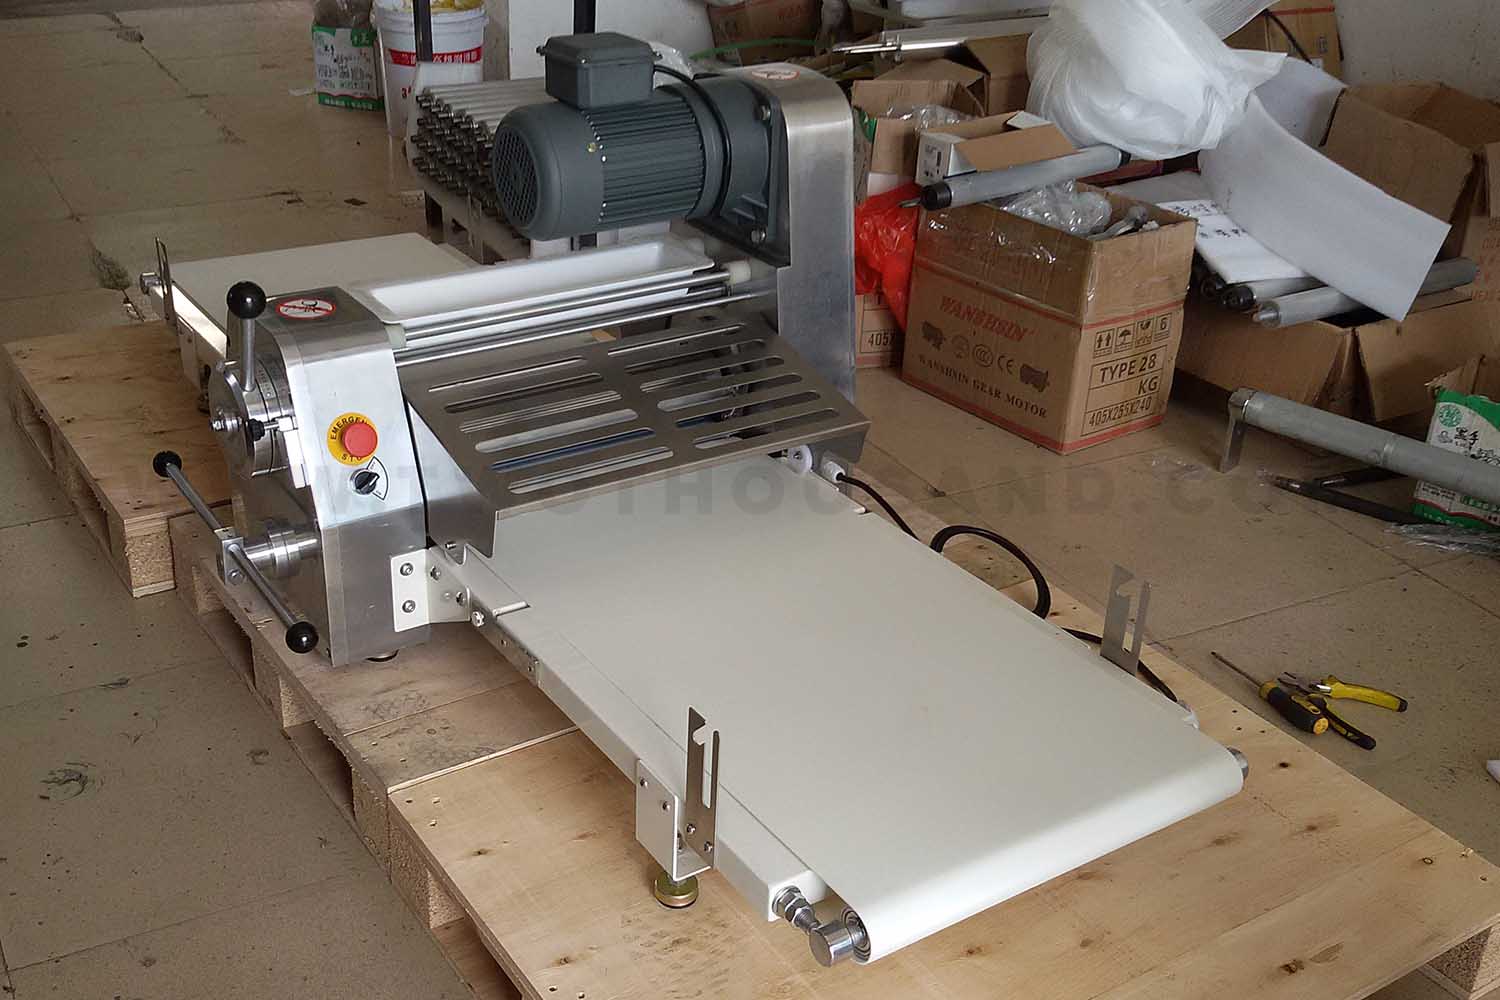 the front view of the dough sheeter